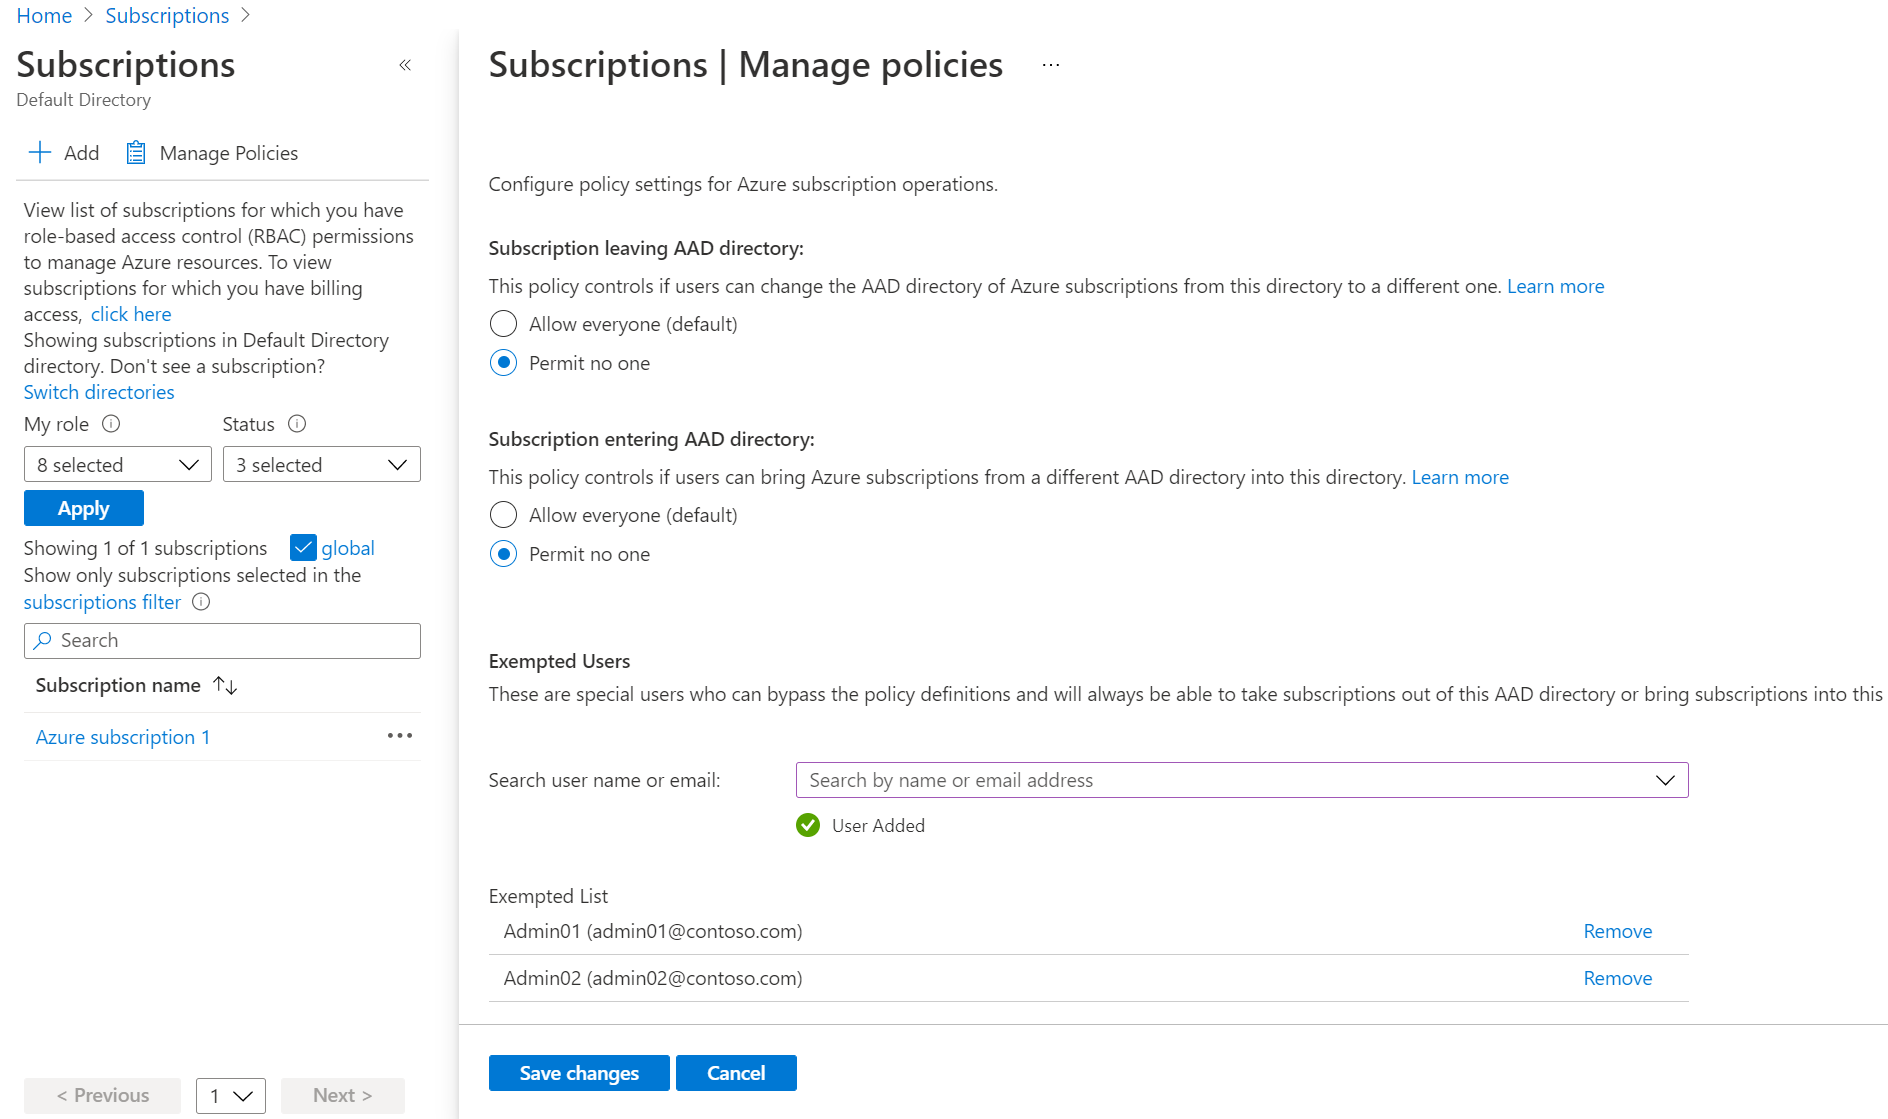 Screenshot showing specific policy settings and exempted users.